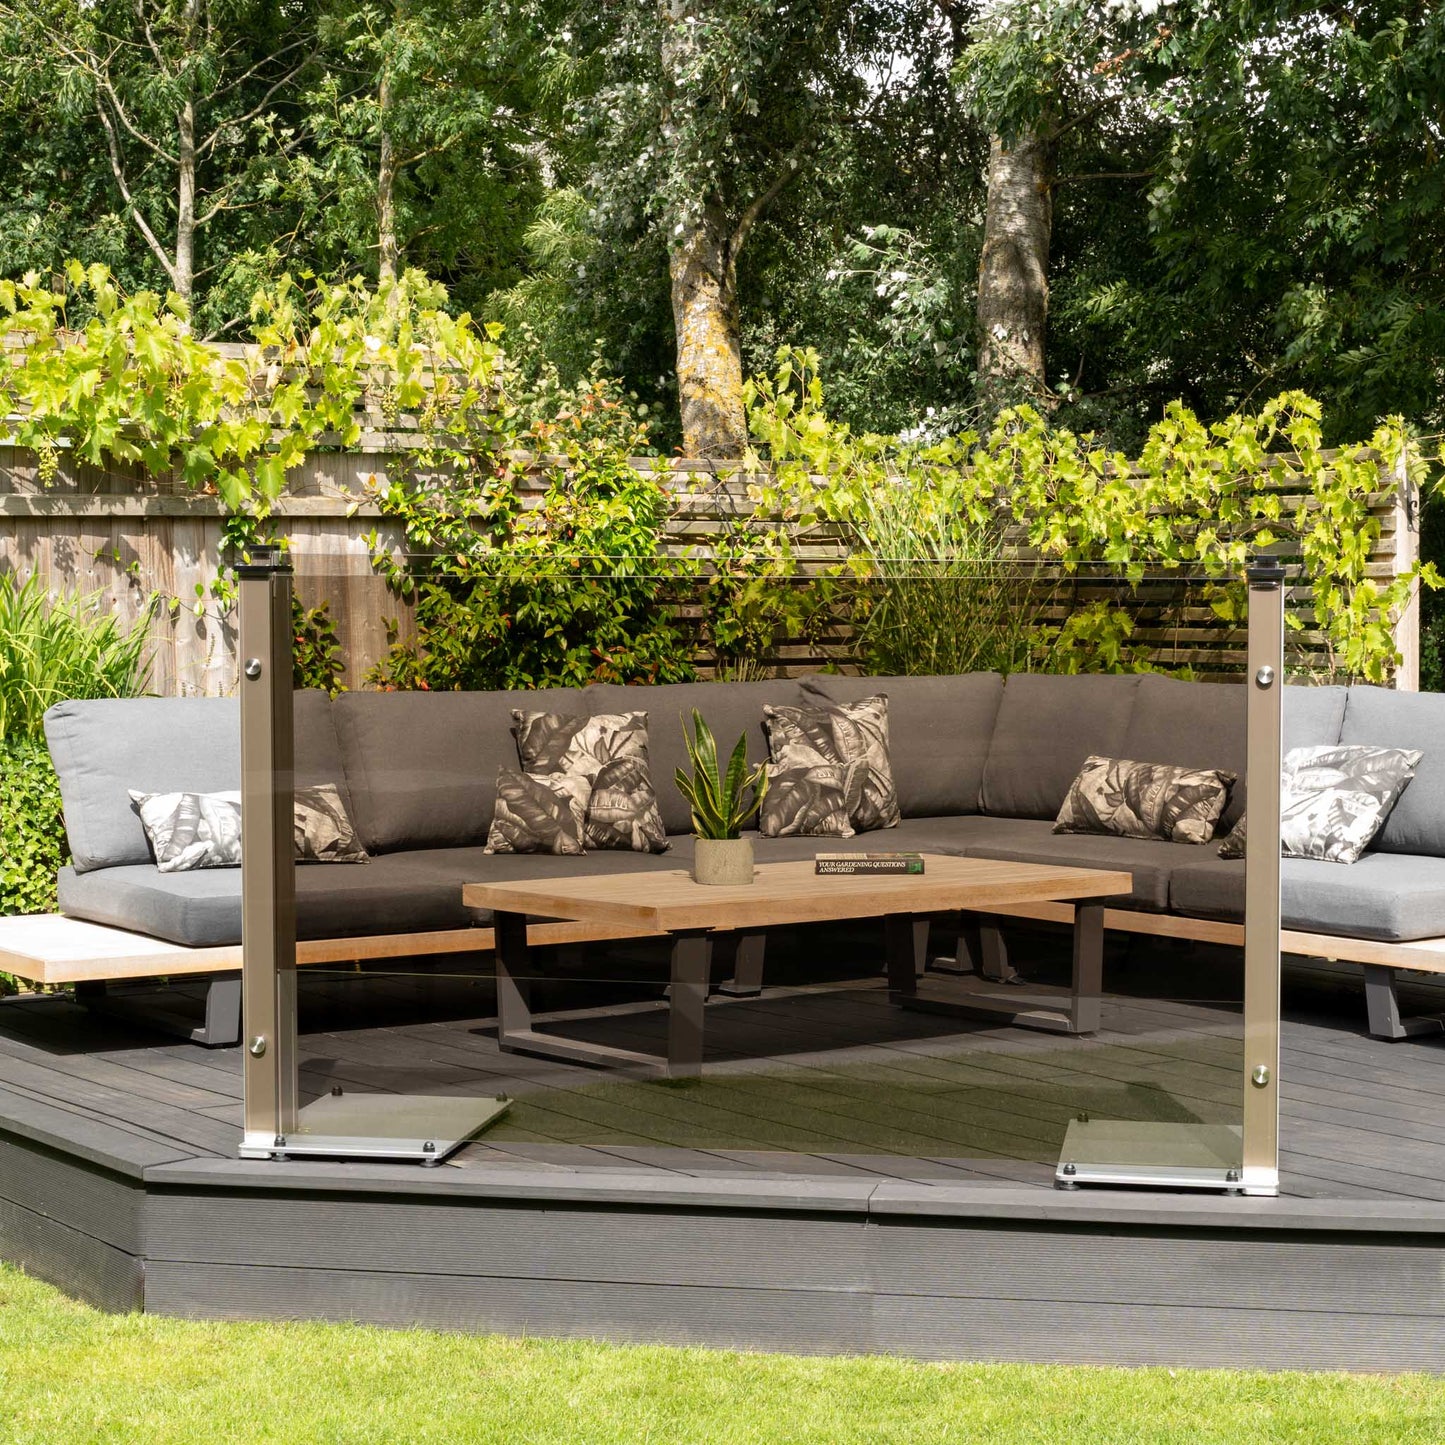 Bronze tinted glass balustrade on a decked platform in front of a garden sofa